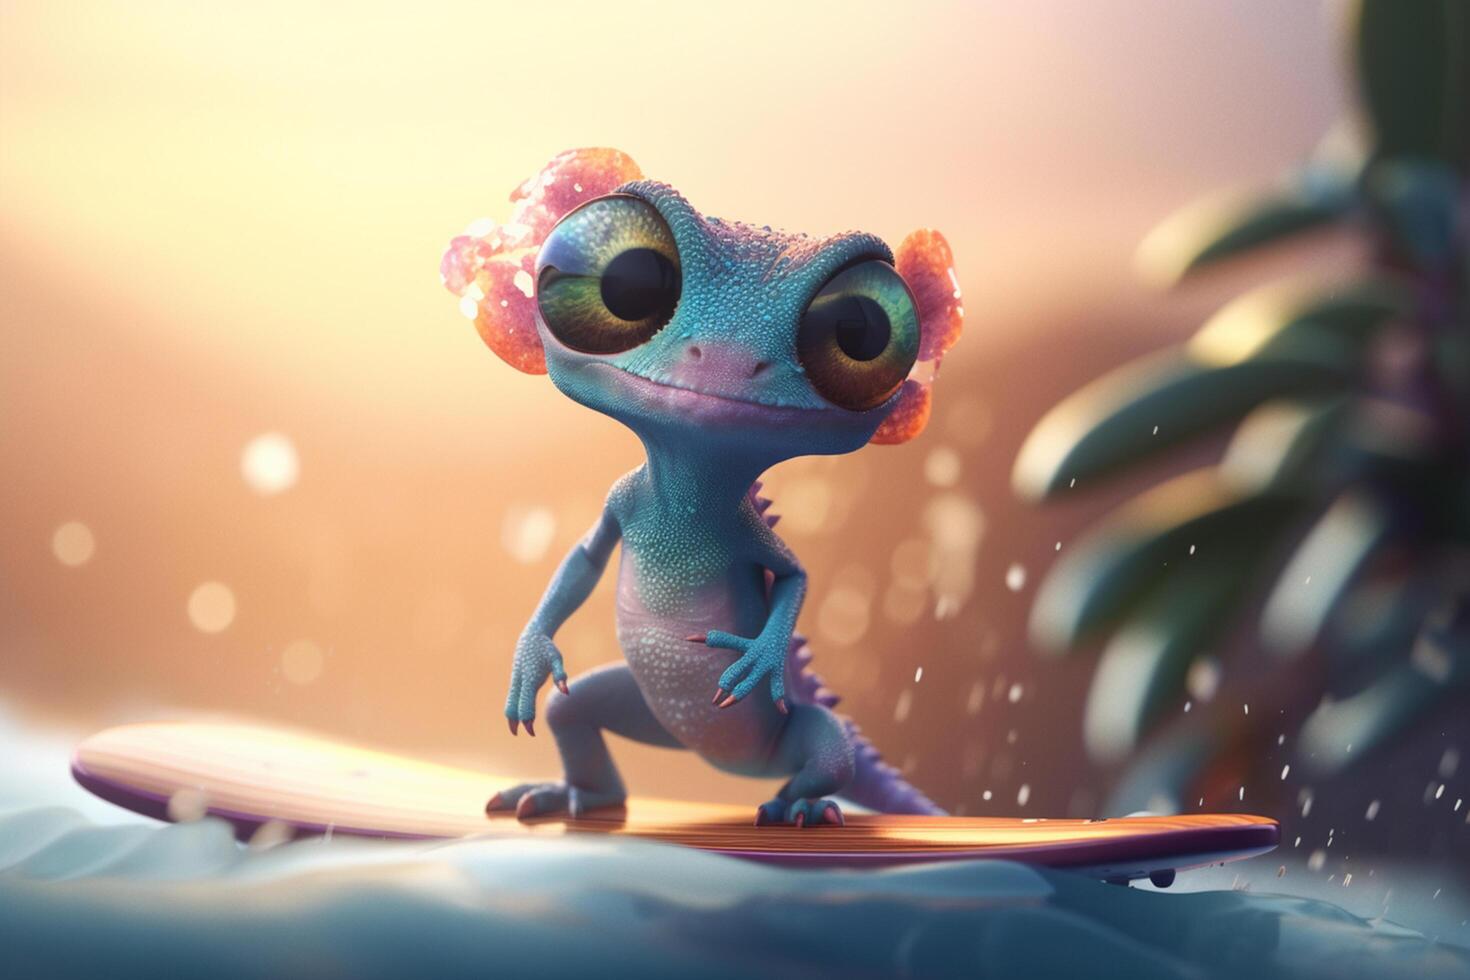 Chameleon Riding the Waves Cool Photorealistic Cartoon Lizard on a Surfboard at the Beach photo